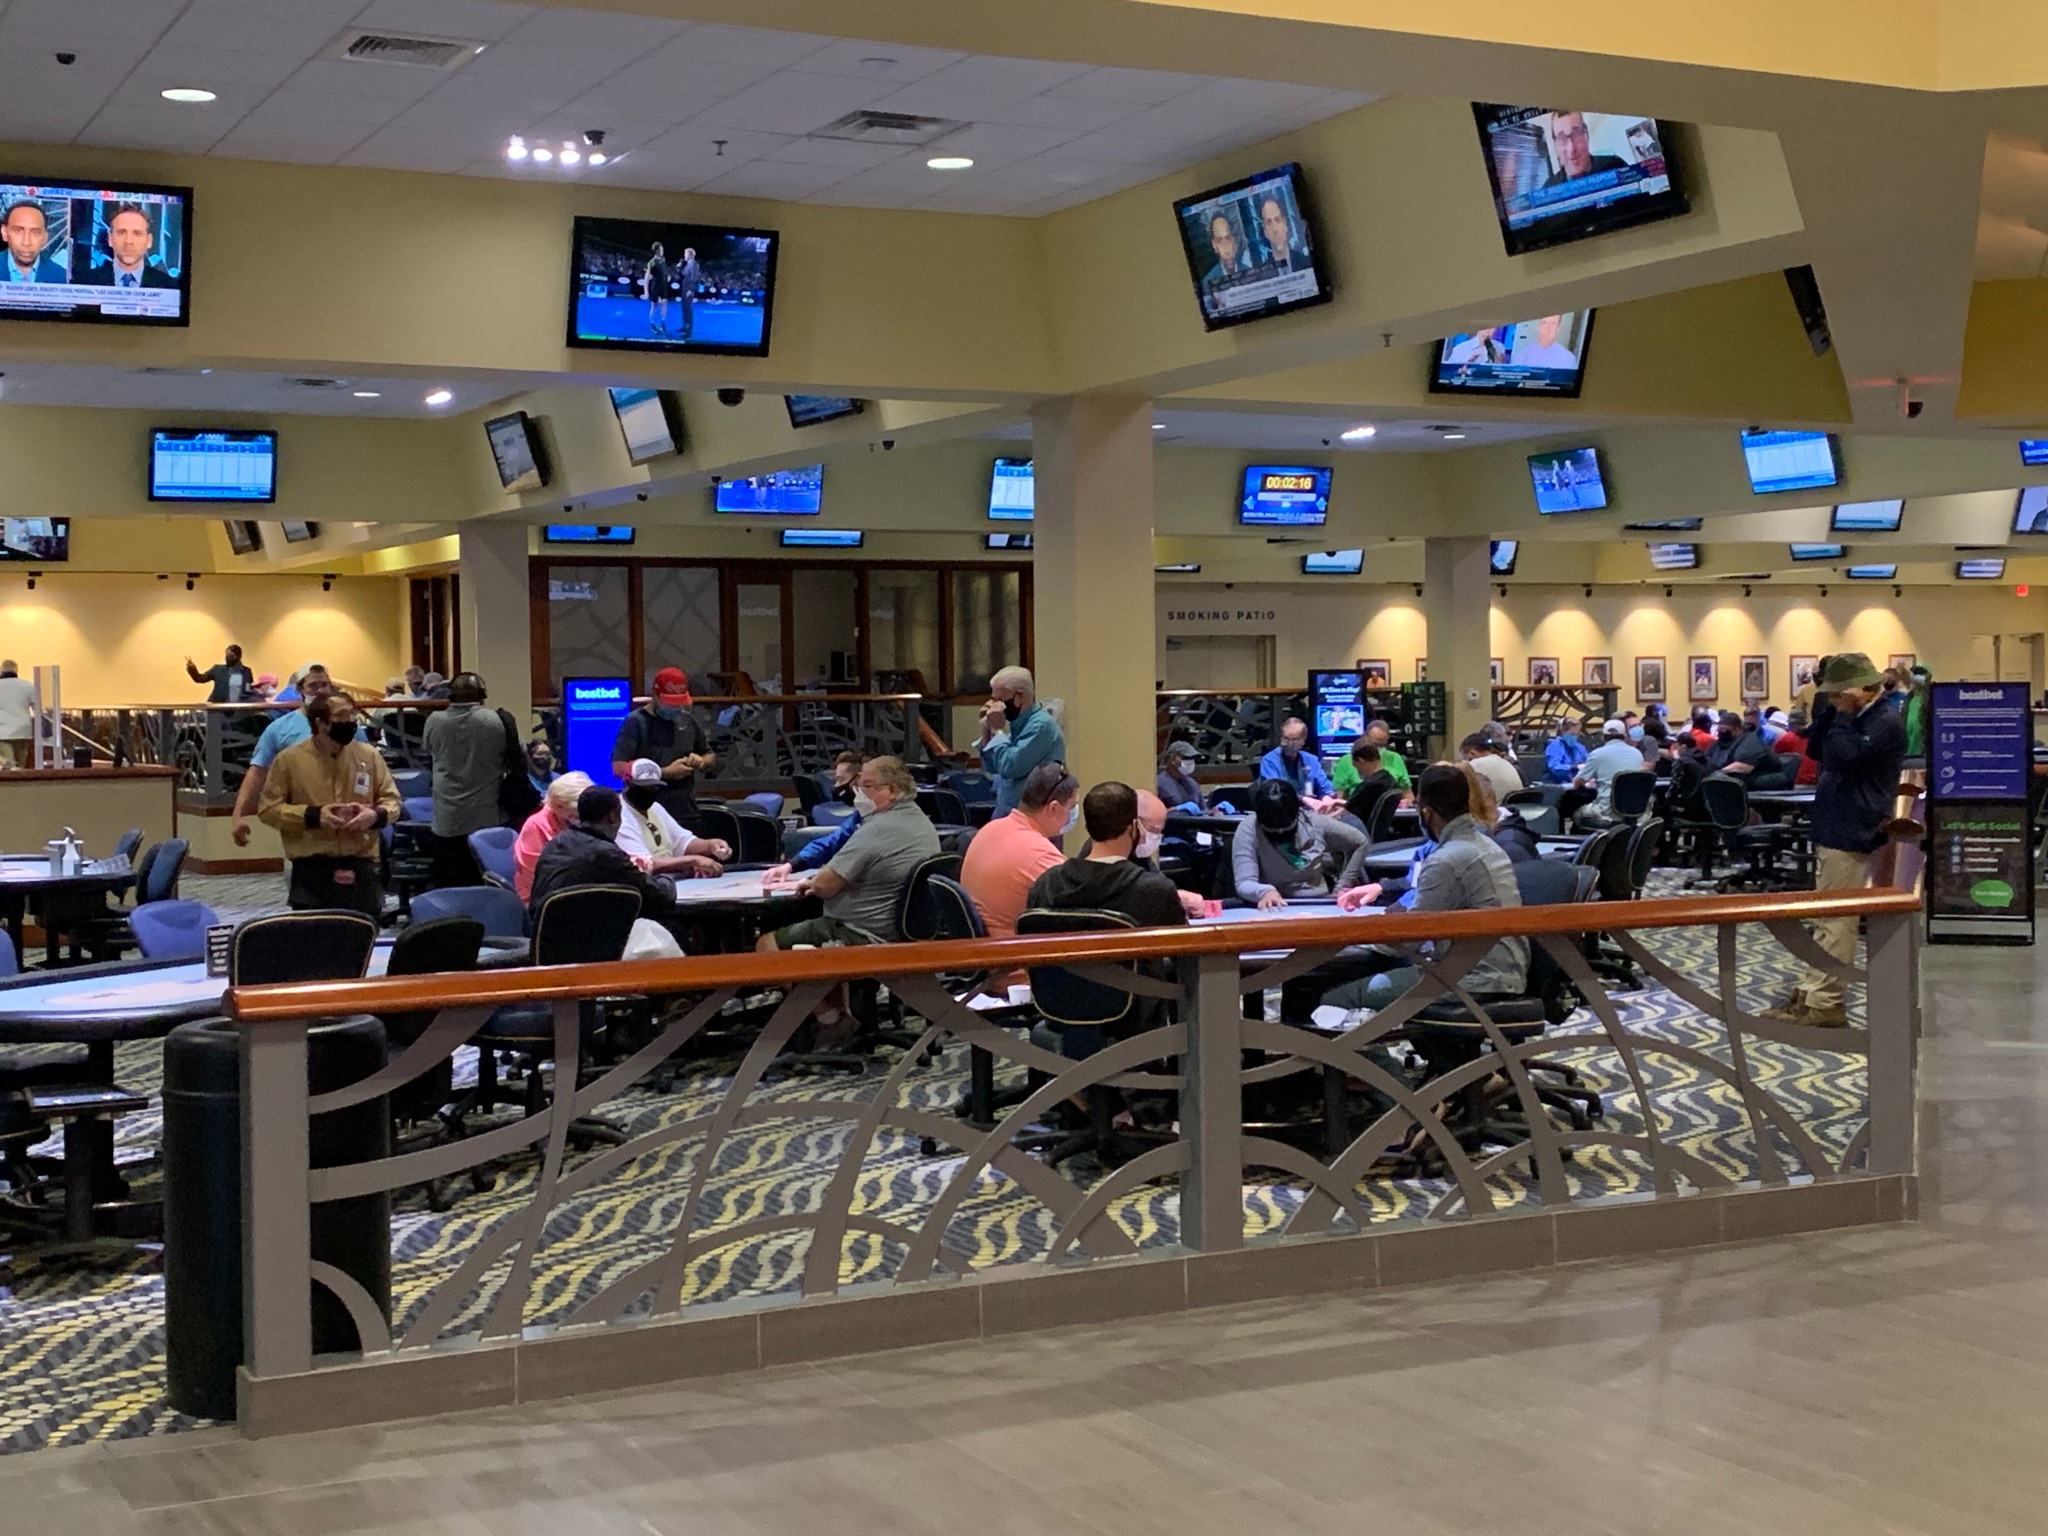 Bestbet Jacksonville Employee Tests Positive for COVID-19, Poker Room Remains Open